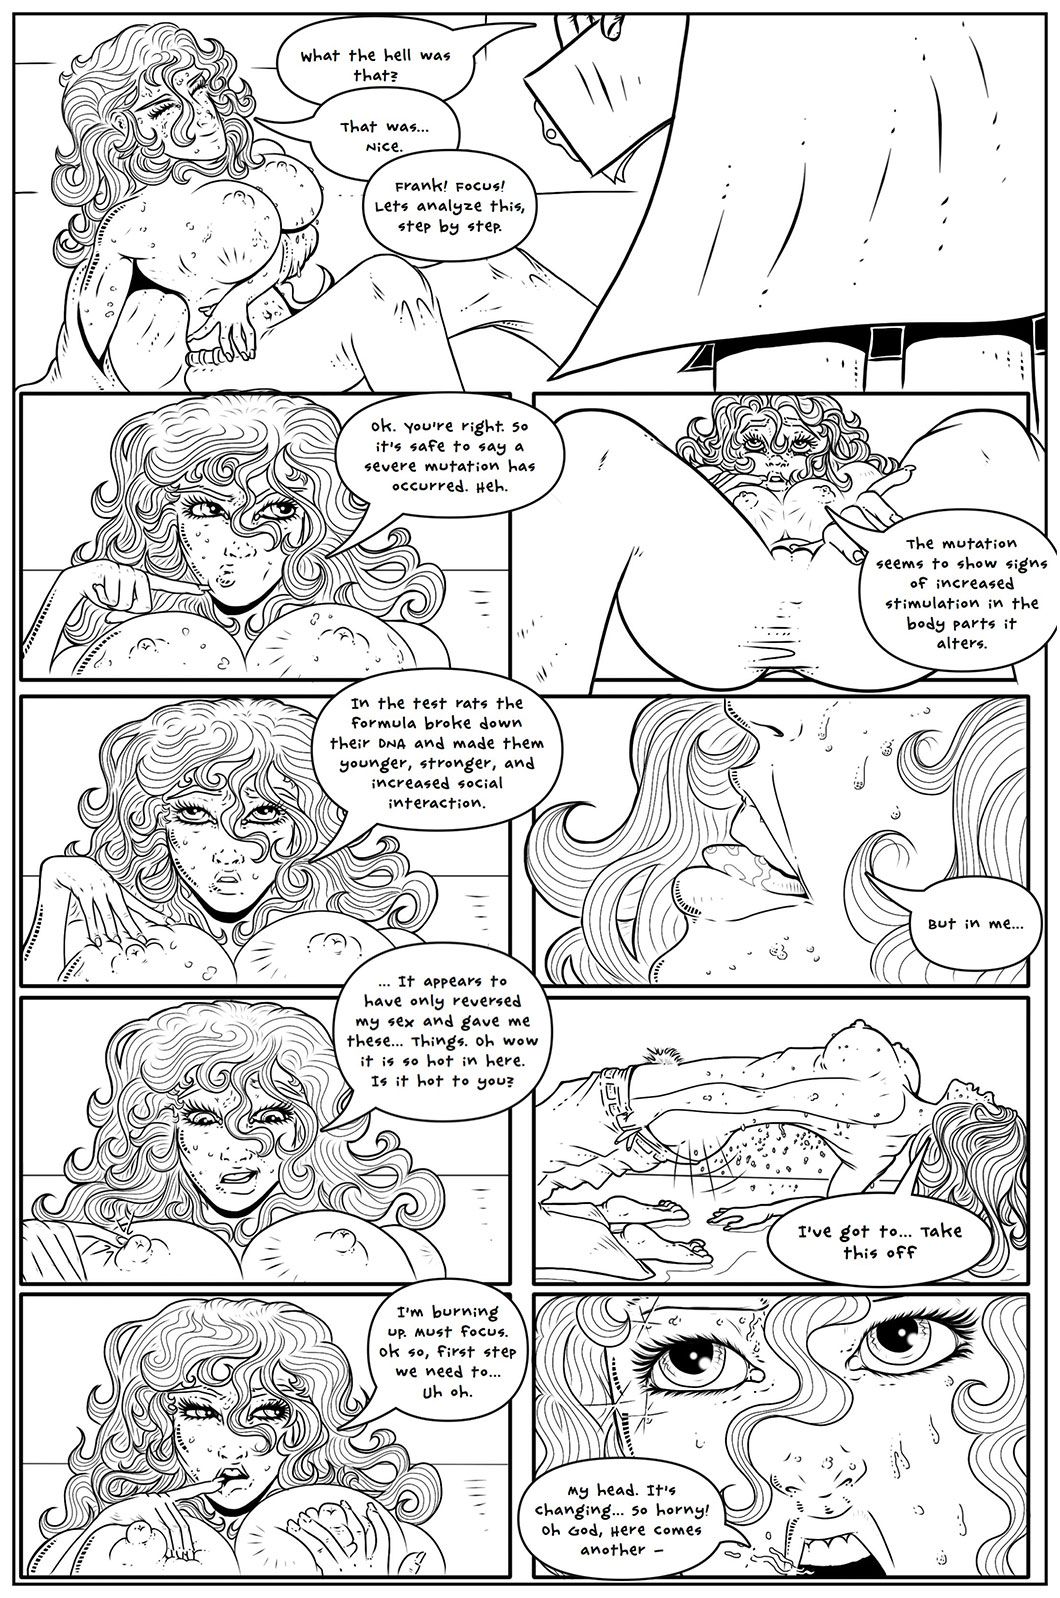 [Jack the Monkey] The Lovely Mutation: Rise of a Goddess (Ongoing?) 10